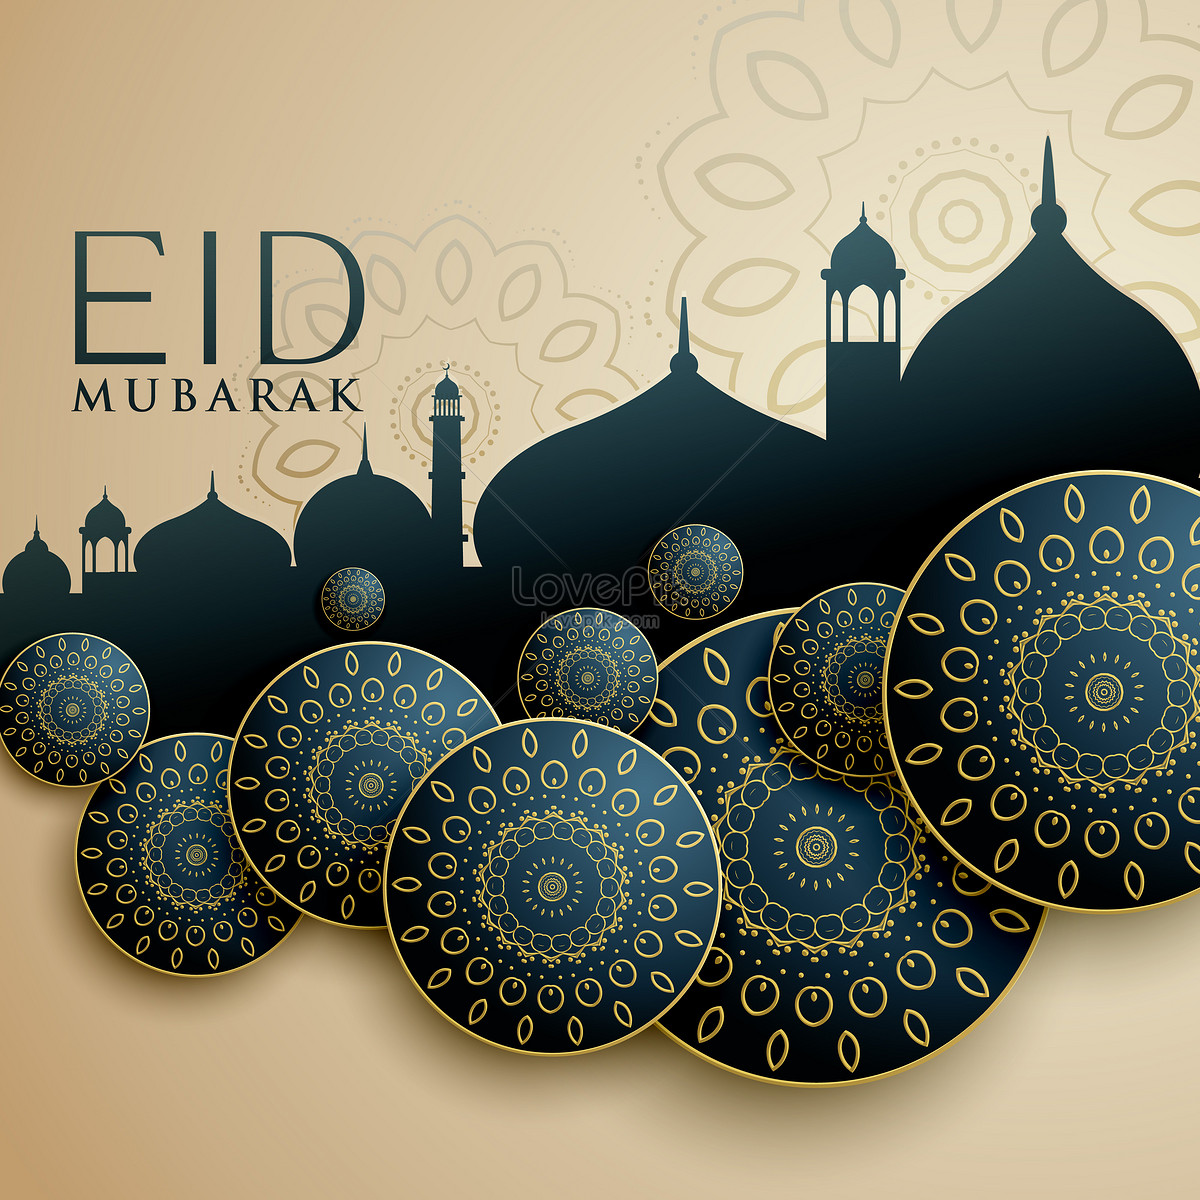 The Ultimate Compilation of Eid Mubarak Images in HD 4K Quality and Beyond